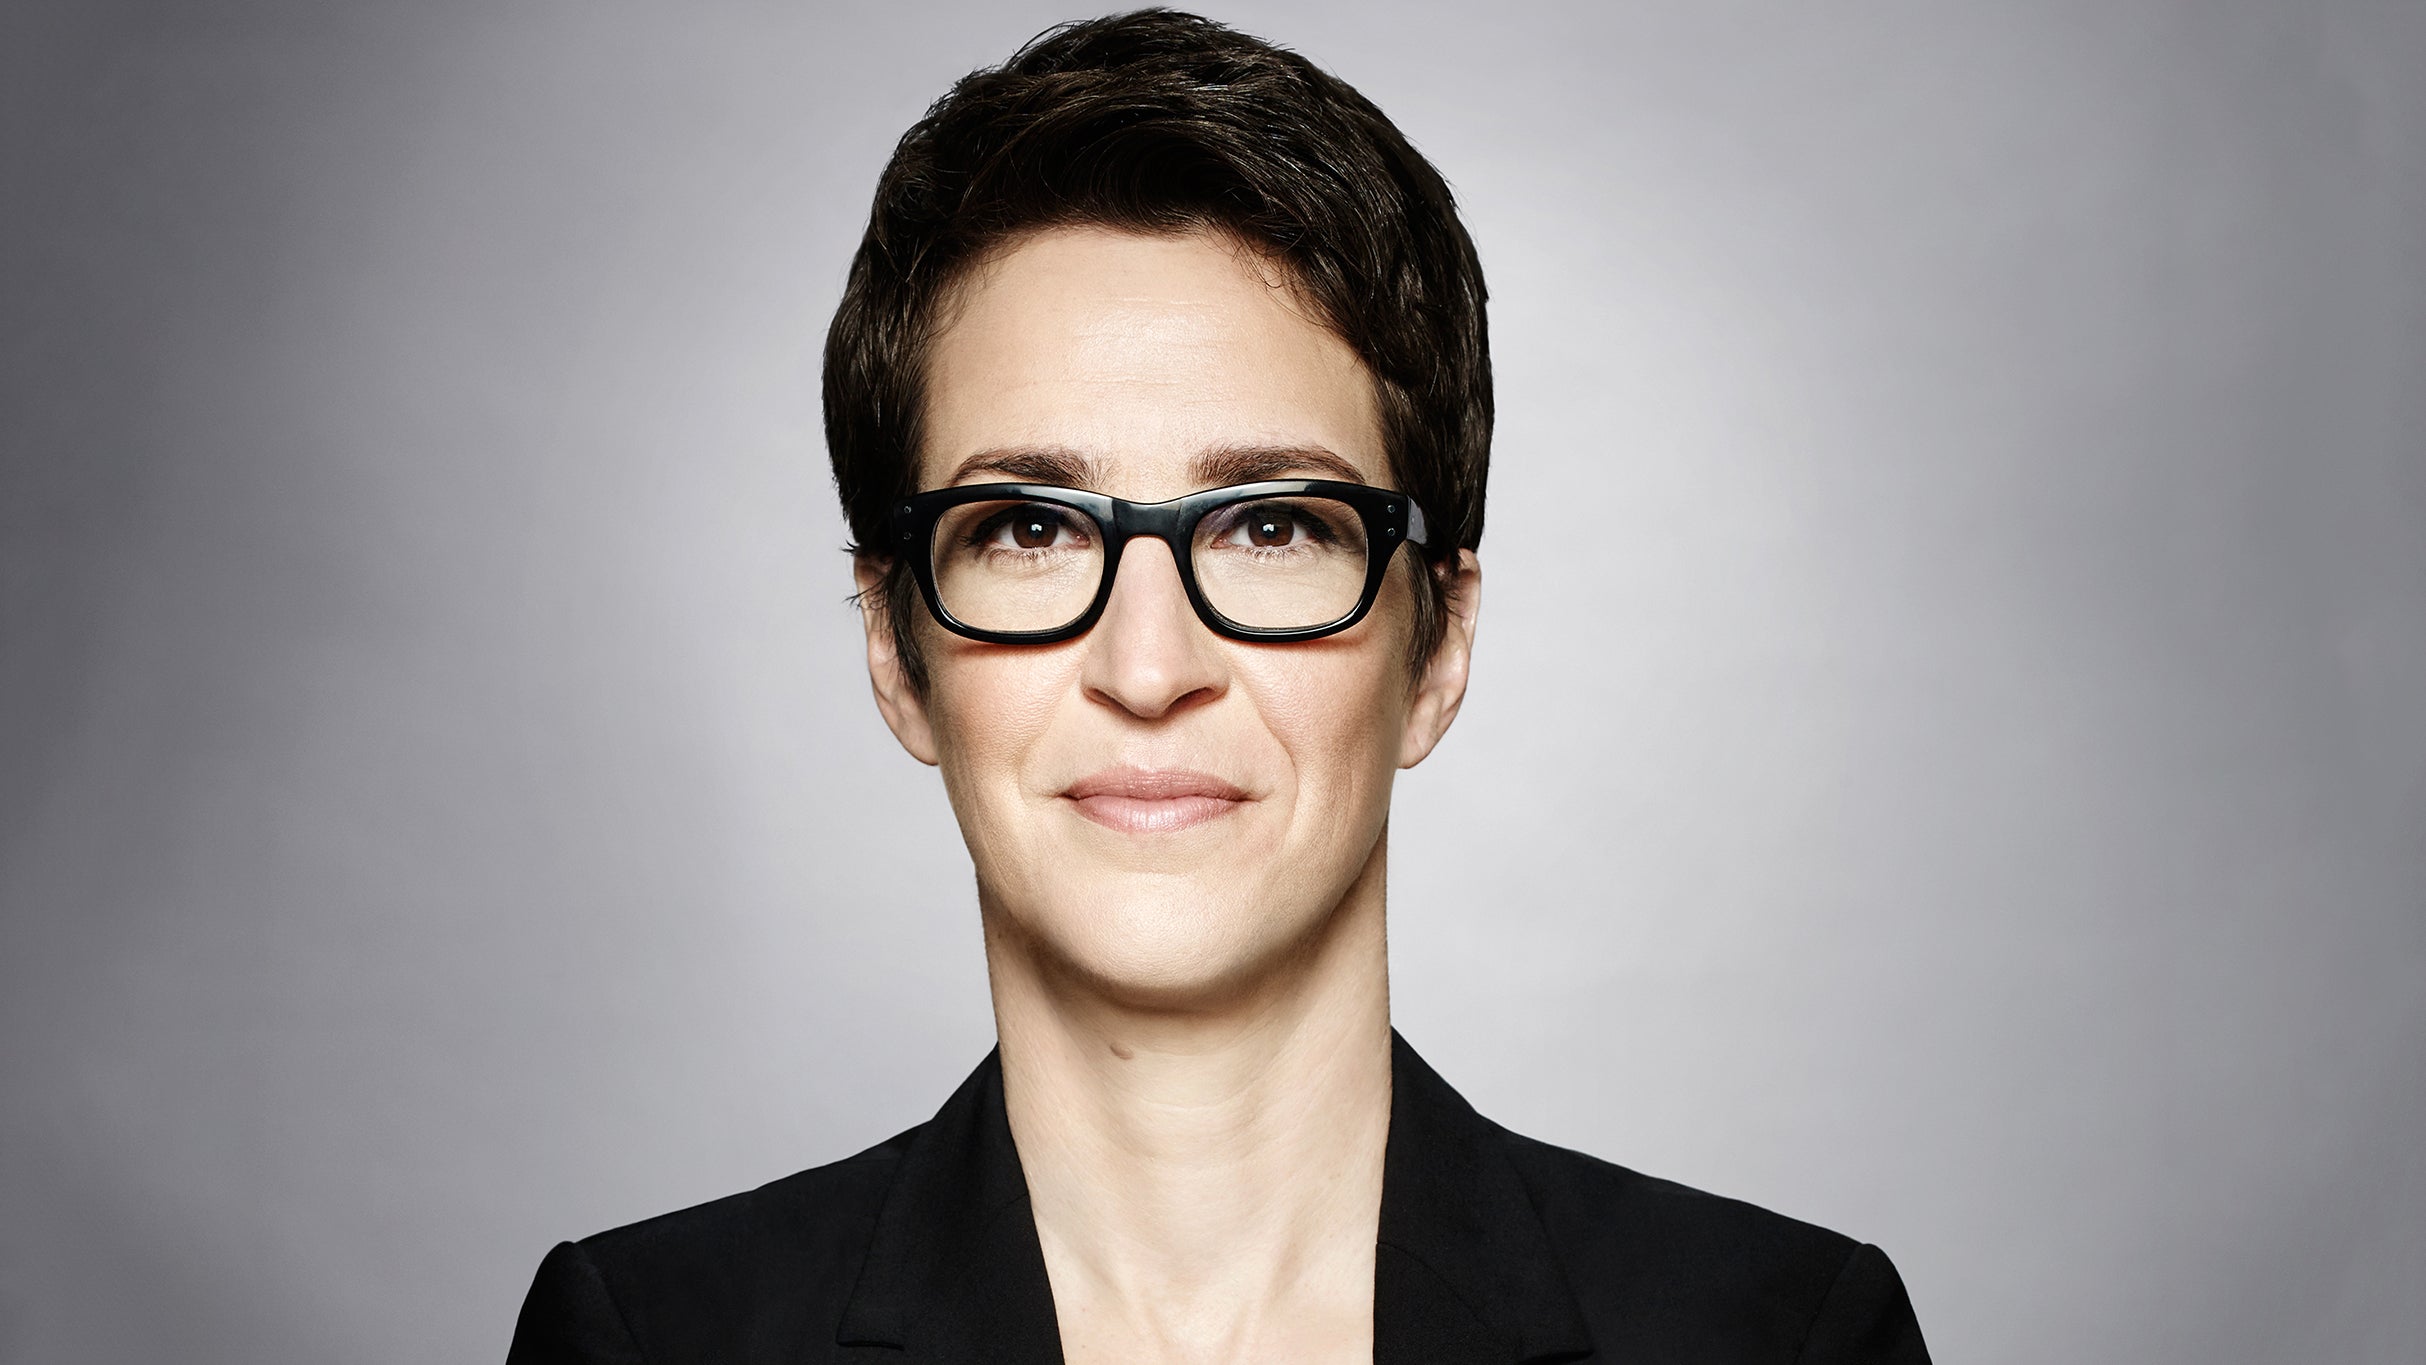 An Evening with Rachel Maddow in Kingston promo photo for Member presale offer code